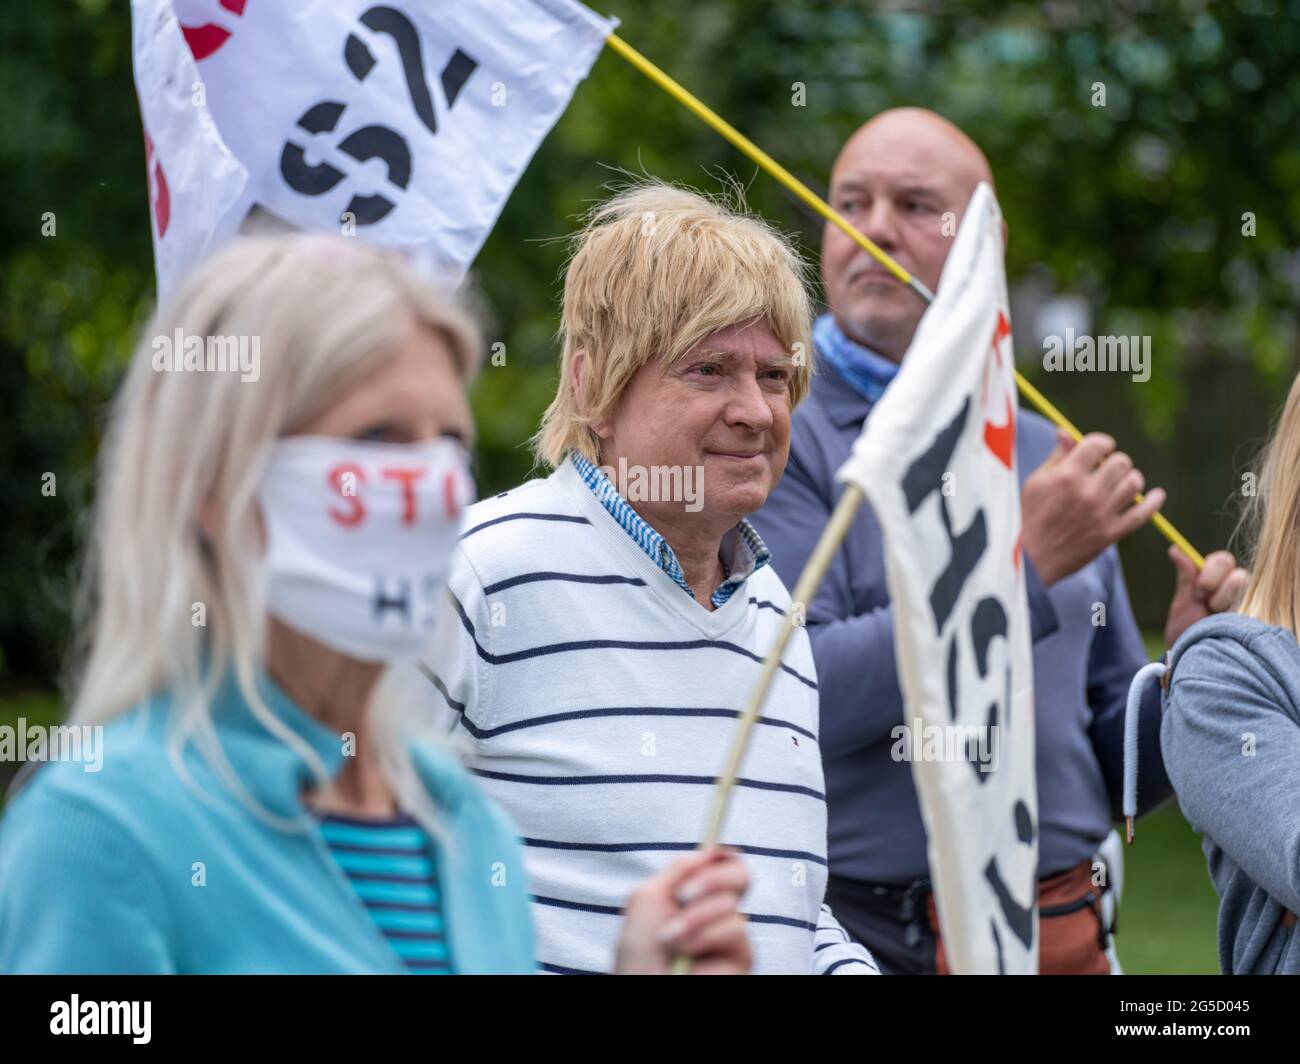 LICHFIELD. UK.  26th JUNE 2021.  HS2 Rebellion Stop HS2 rally in Beacon Park, Lichfield, marks the beginning of an 8 day walk to Wigan to raise awareness of the Stop HS2 campaign. Conservative MP Michael Fabricant (centre) speaks in support of the protestors efforts .  Credit: Richard Grange / Alamy Live News Stock Photo